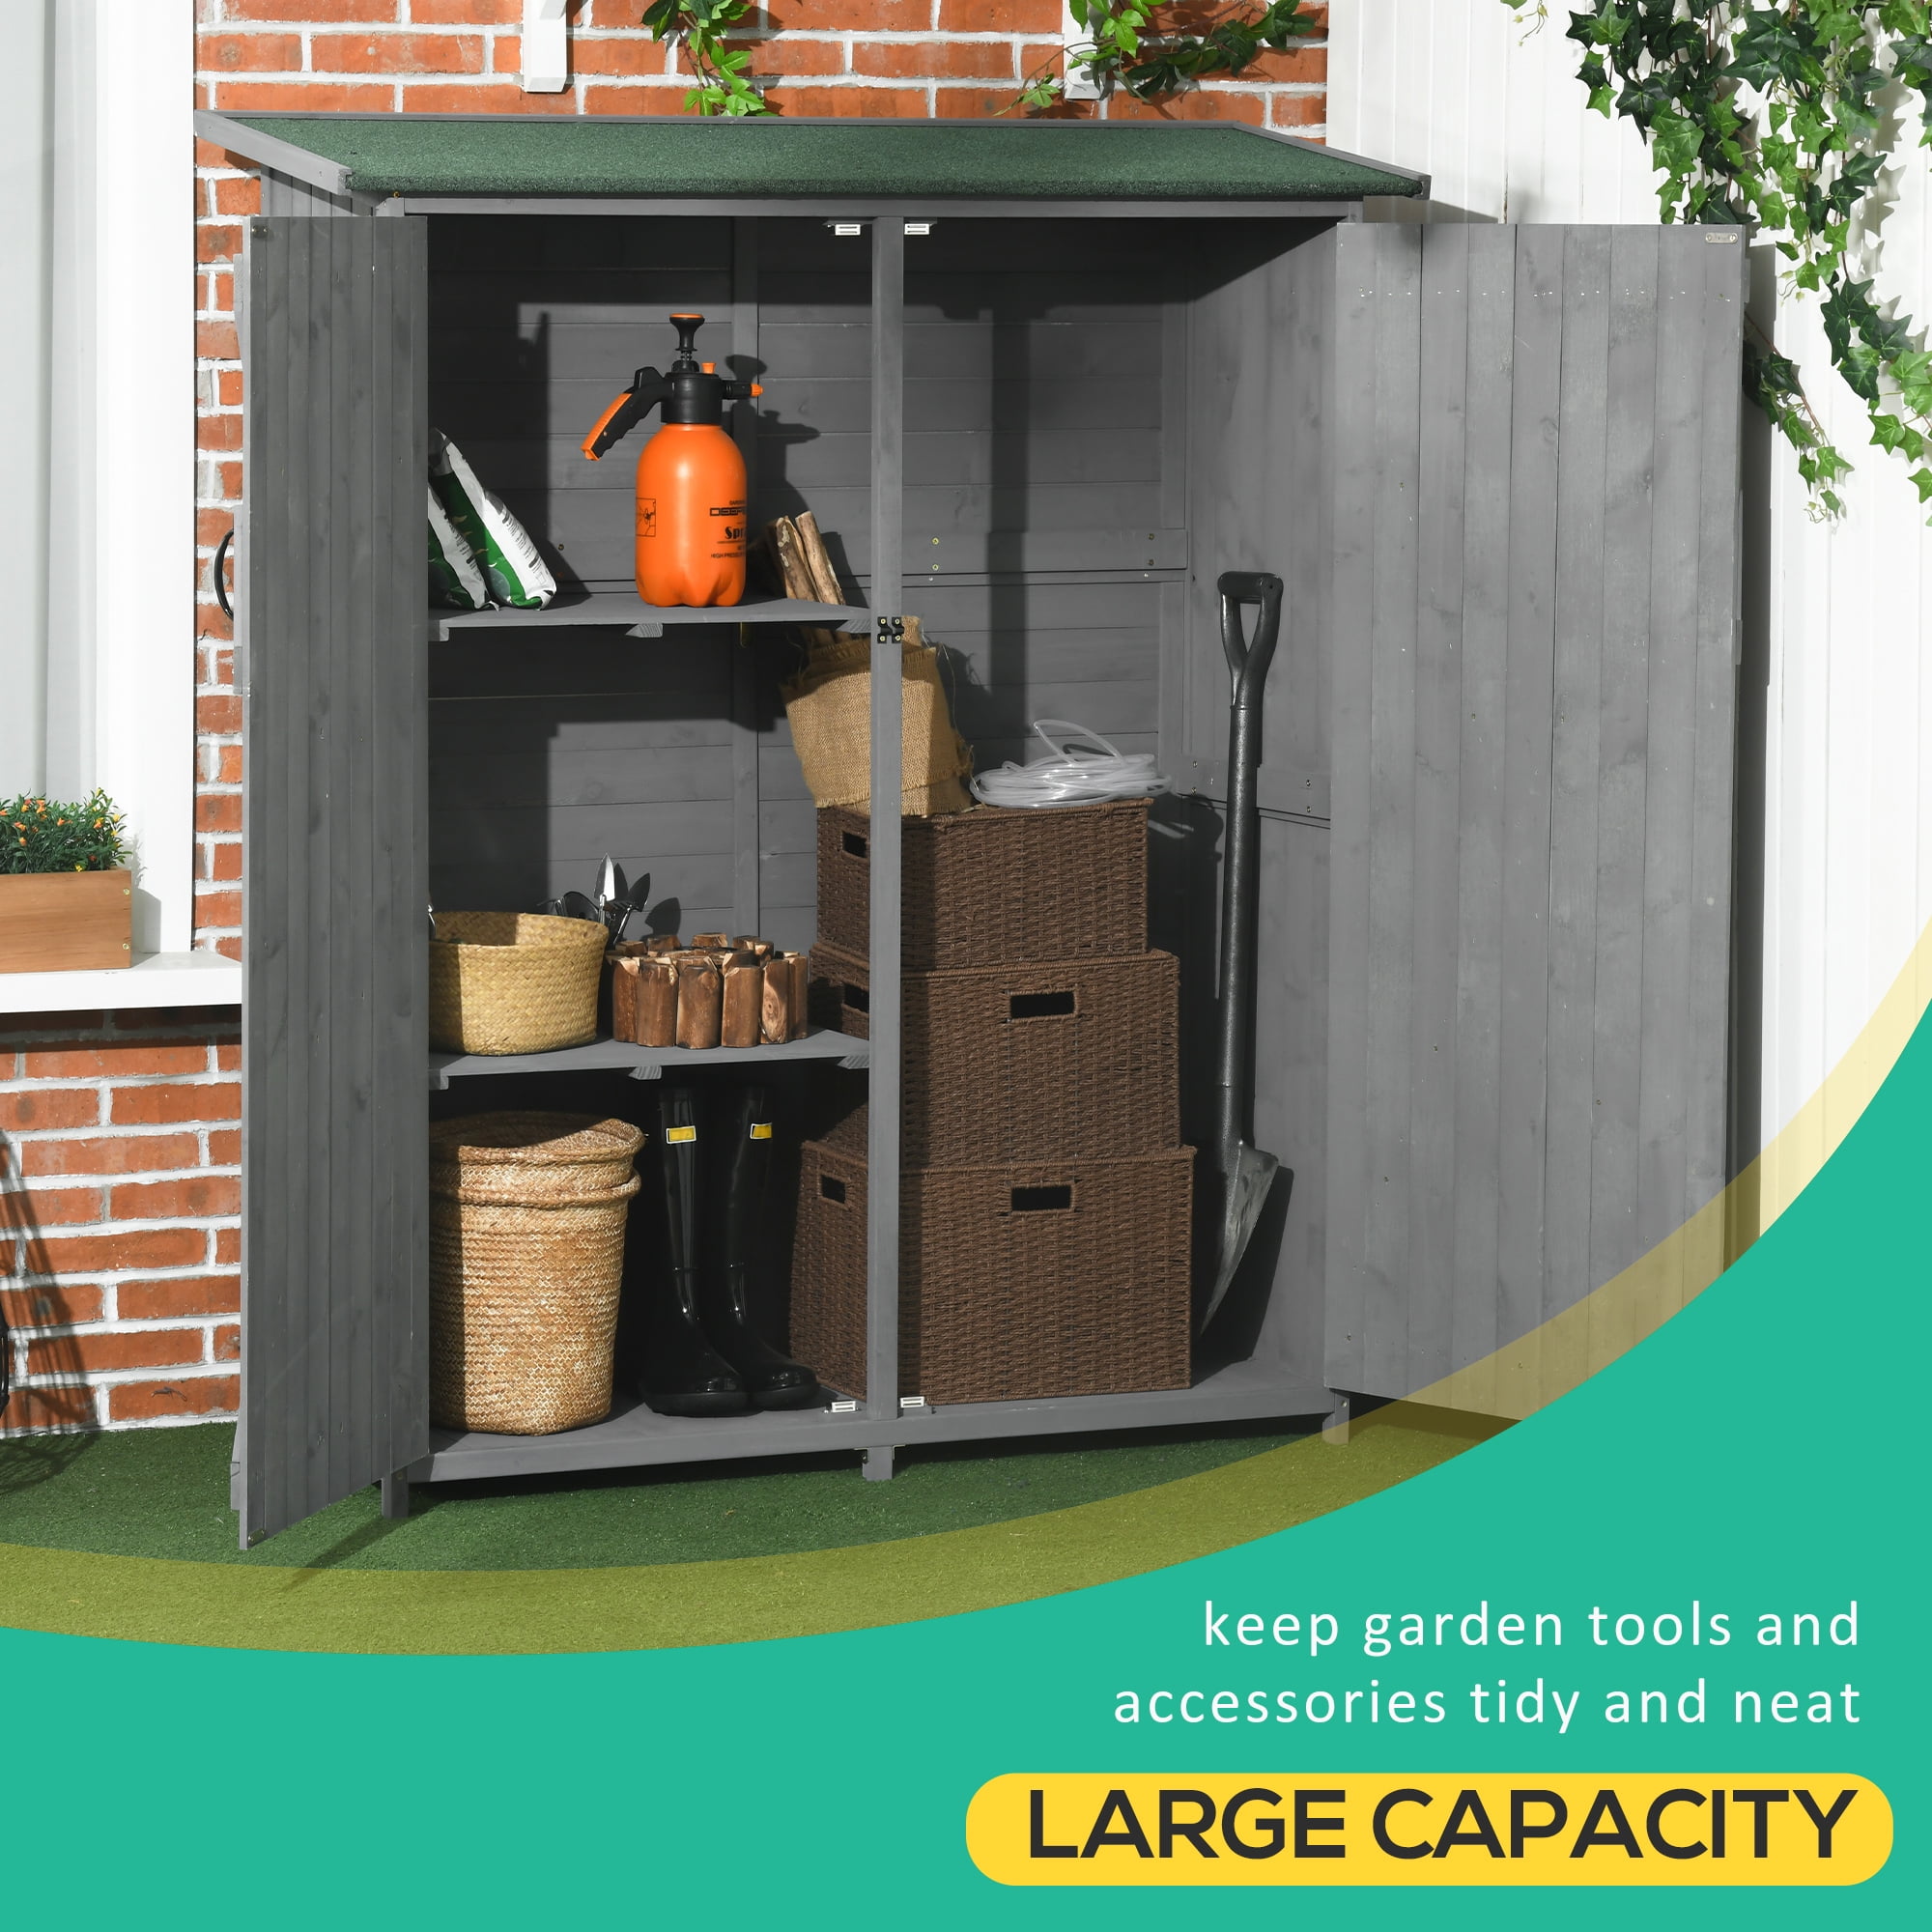 EAST OAK Outdoor Storage Shed, 53Cu.ft Vertical Resin Tool 4 x 6.6 FT  Cabinet w/o Shelf for Garden, Patio, Backyard, All-Weather Outdoor Storage